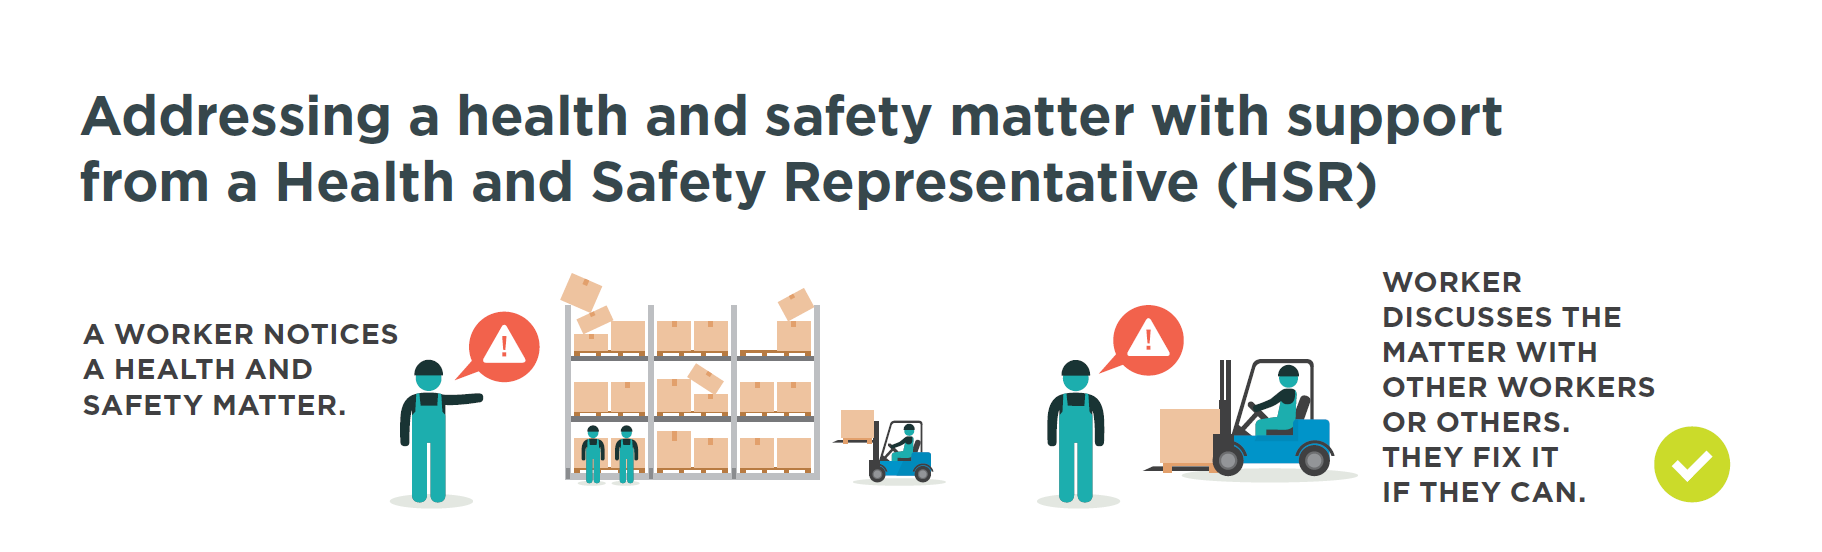 addressing a health and safety issue